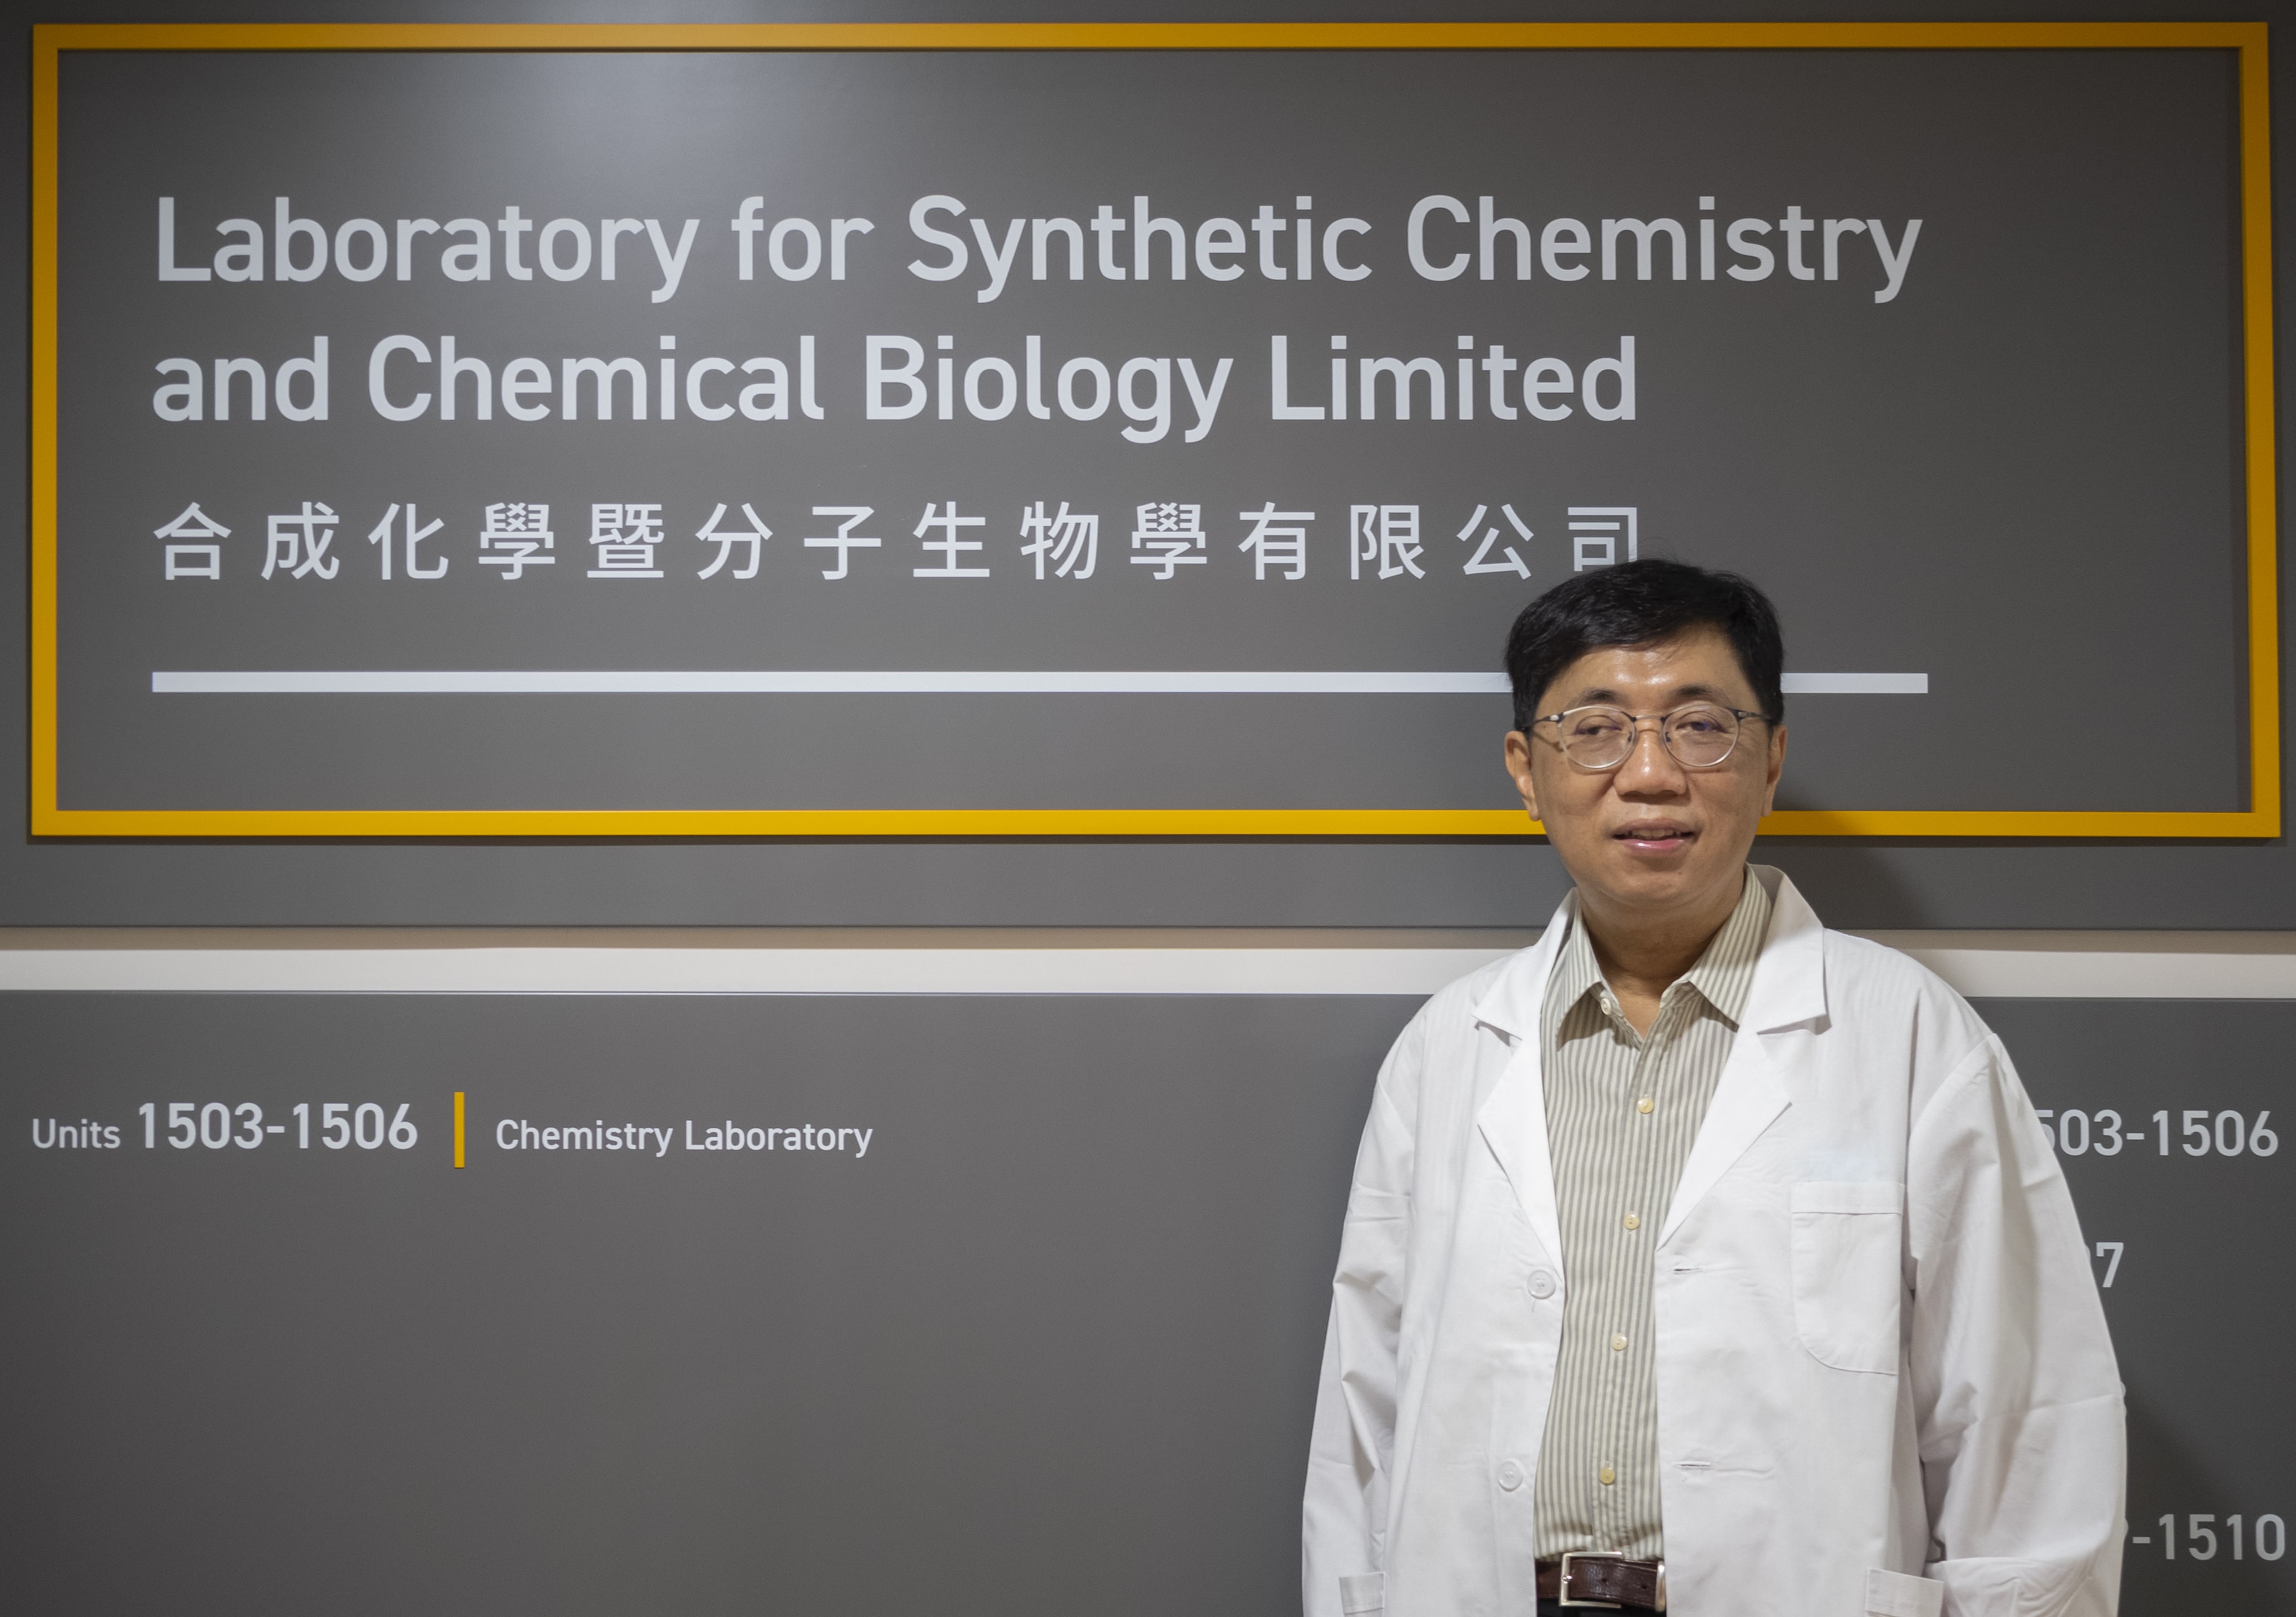 A vision on synthetic chemistry and chemical biology for innovative medicines.